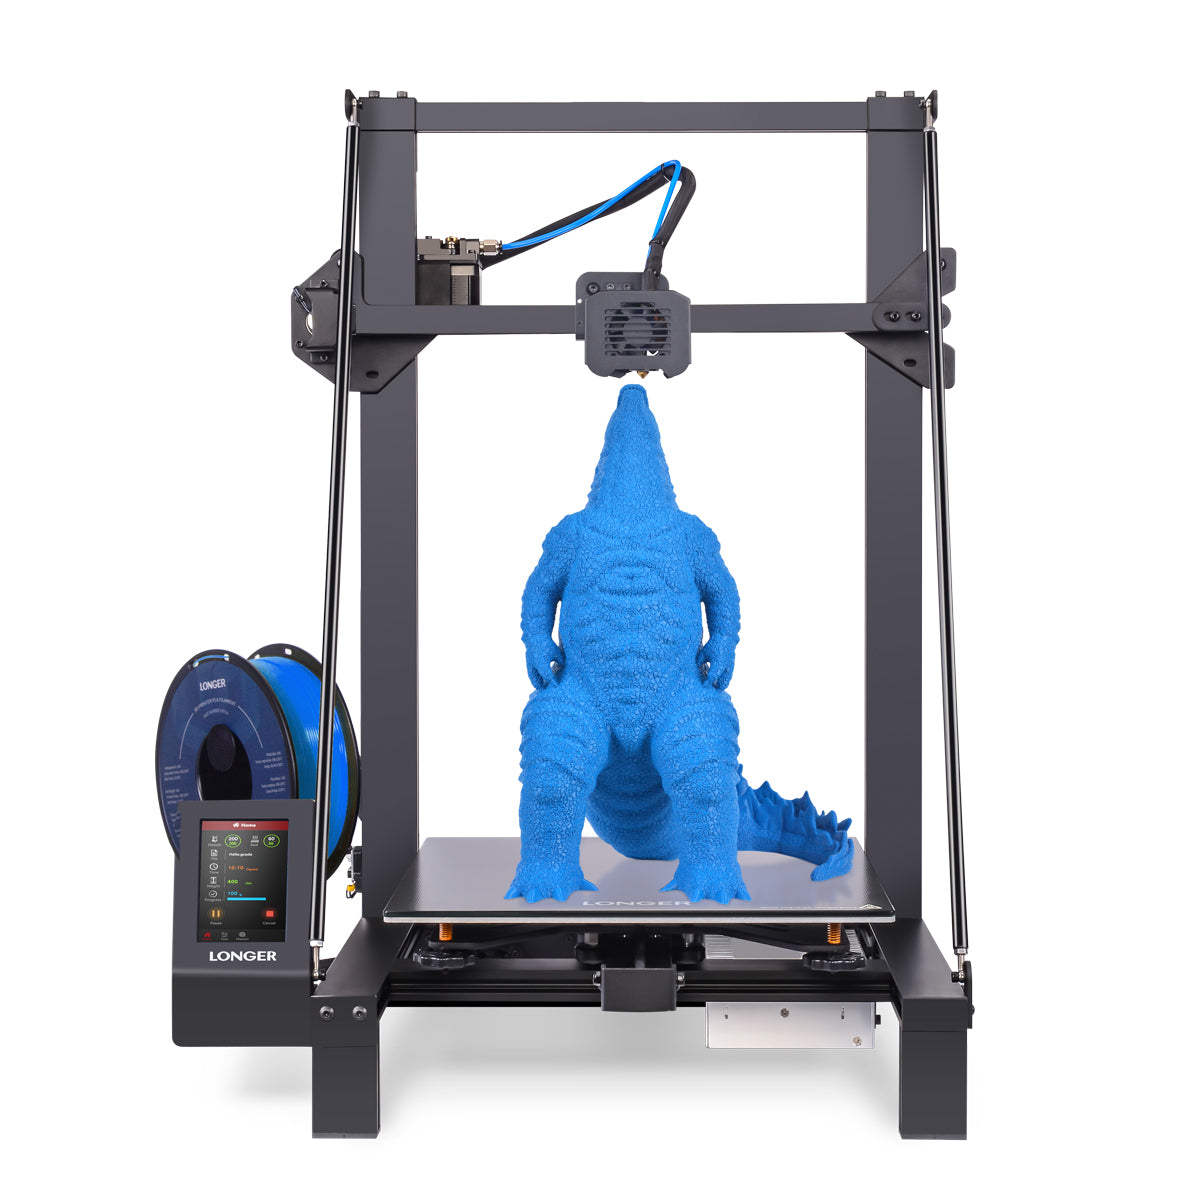 Top 3D Printer Models and Buying Guide